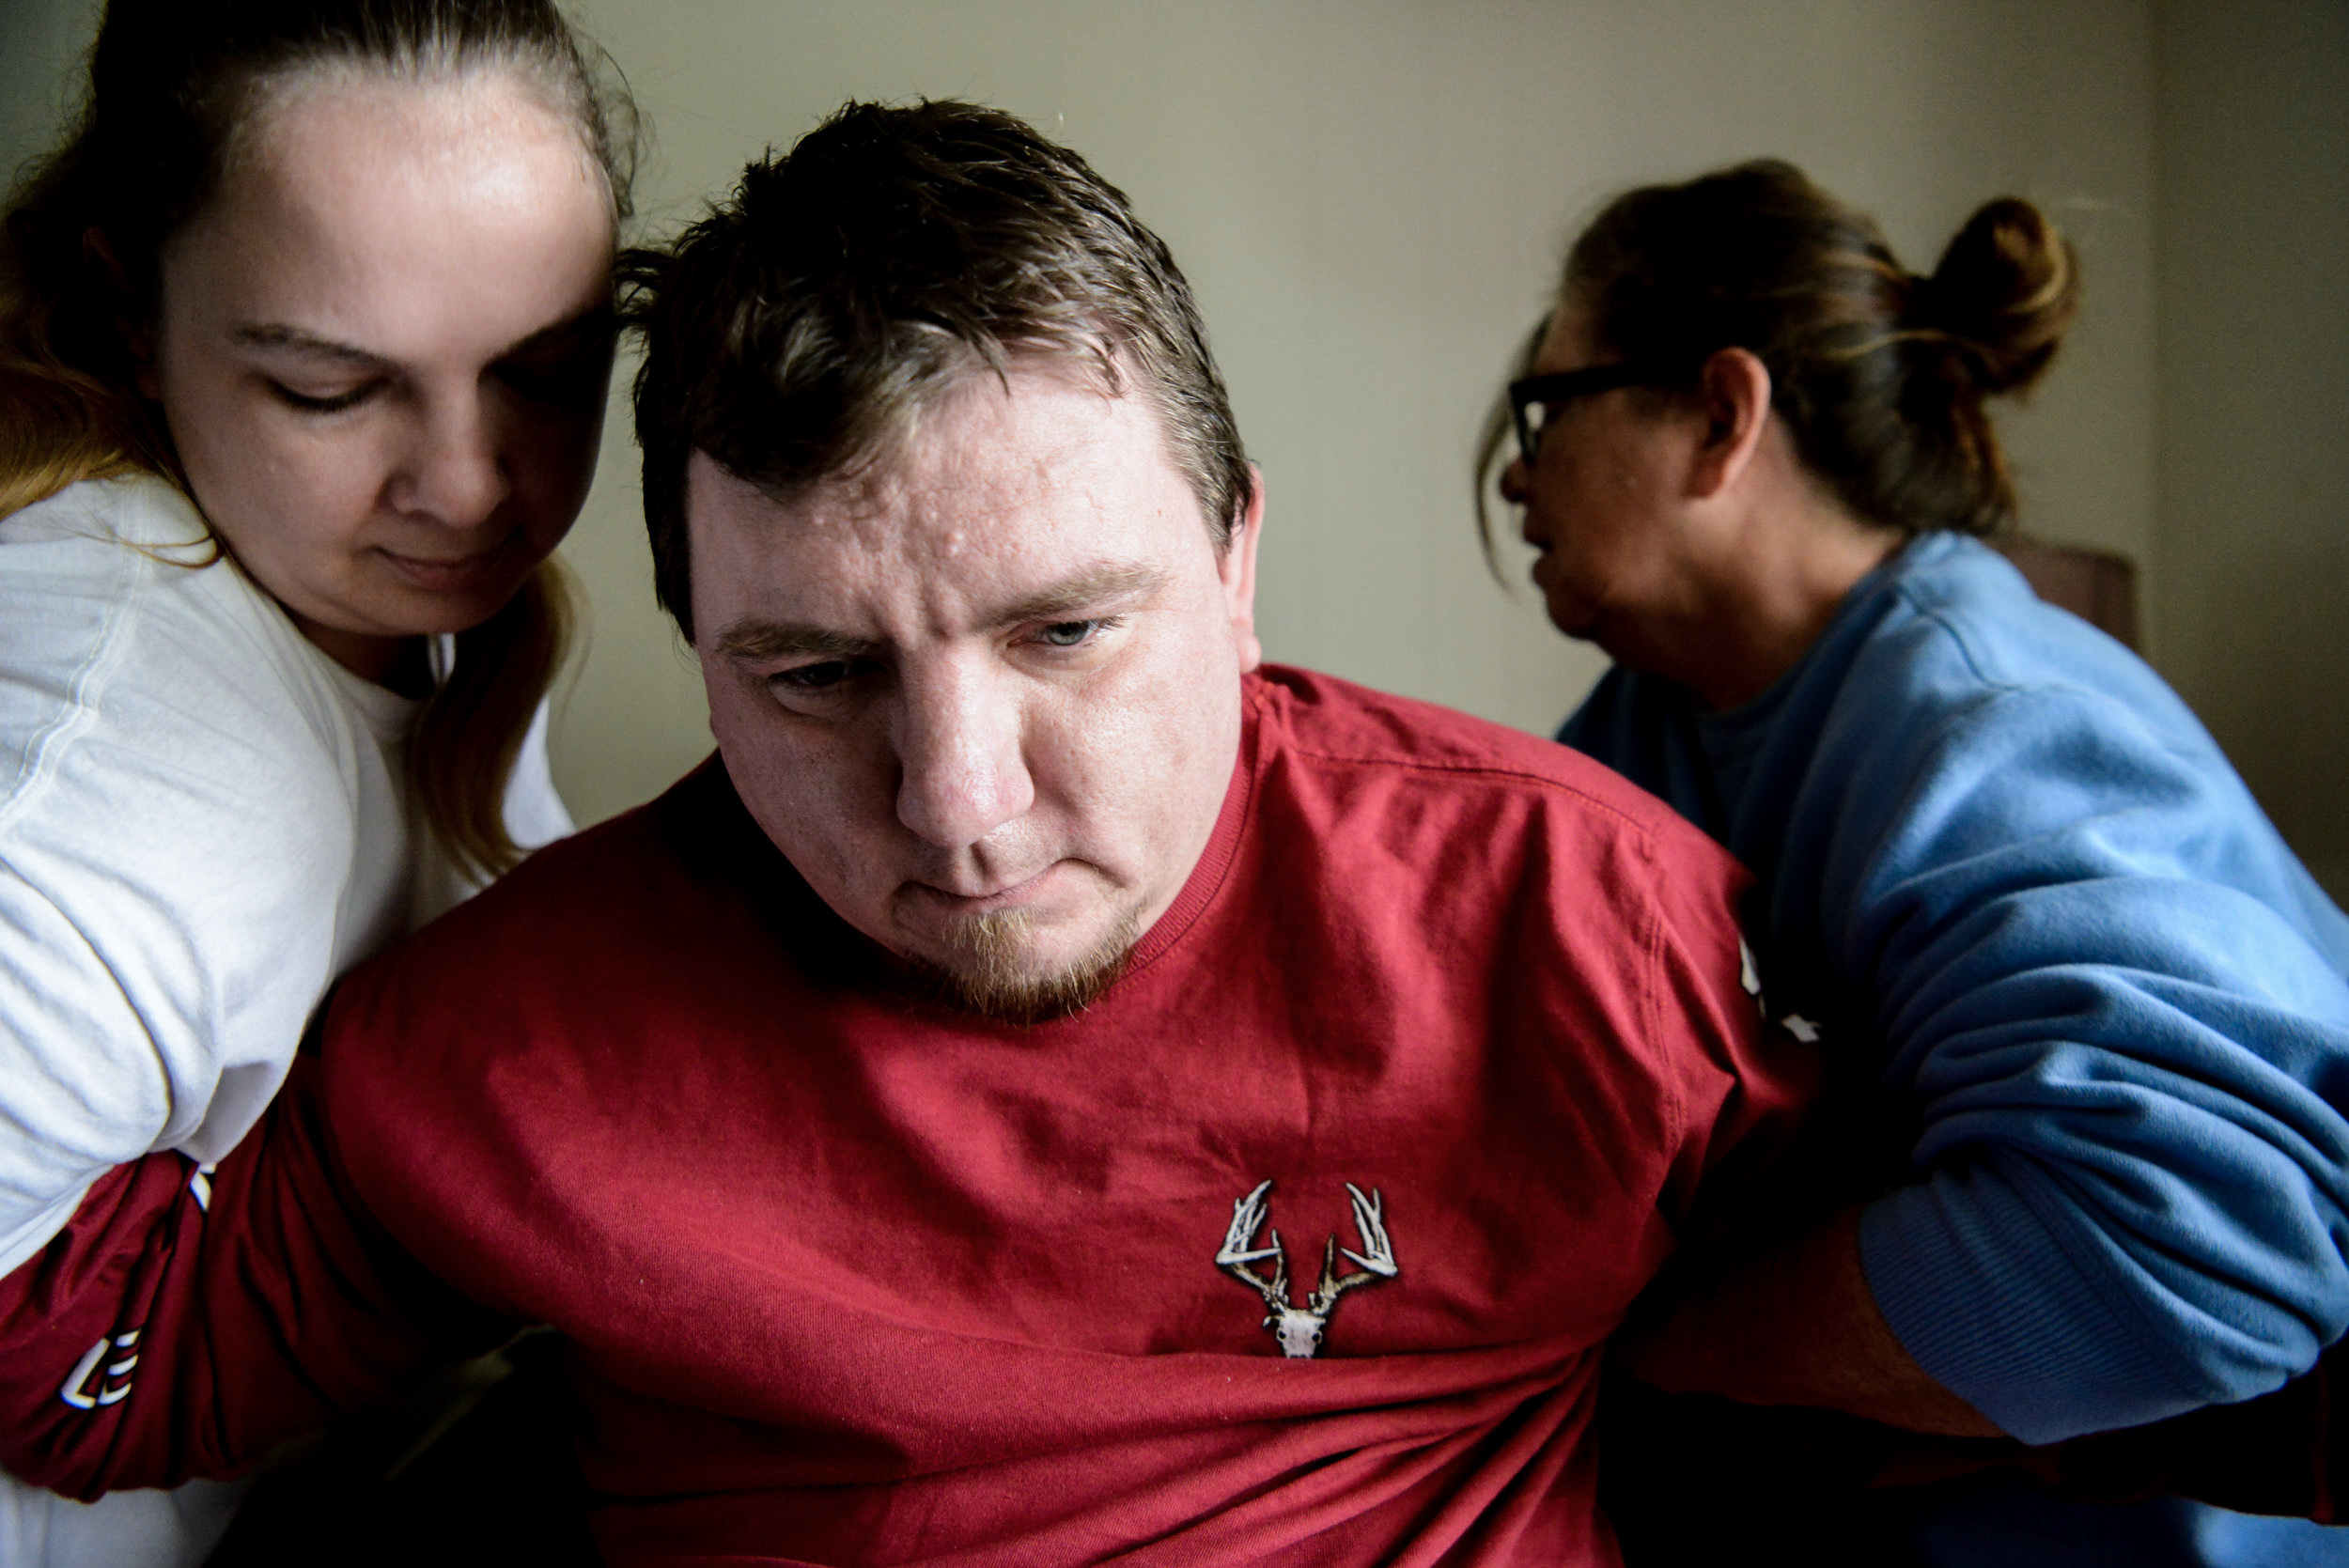  Adam waits for Chery and his medical aid to finish dressing him during their morning routine. It takes two people to get Adam ready every day, including changing his waste bags and moving him from the bed to a motorized wheel chair. 